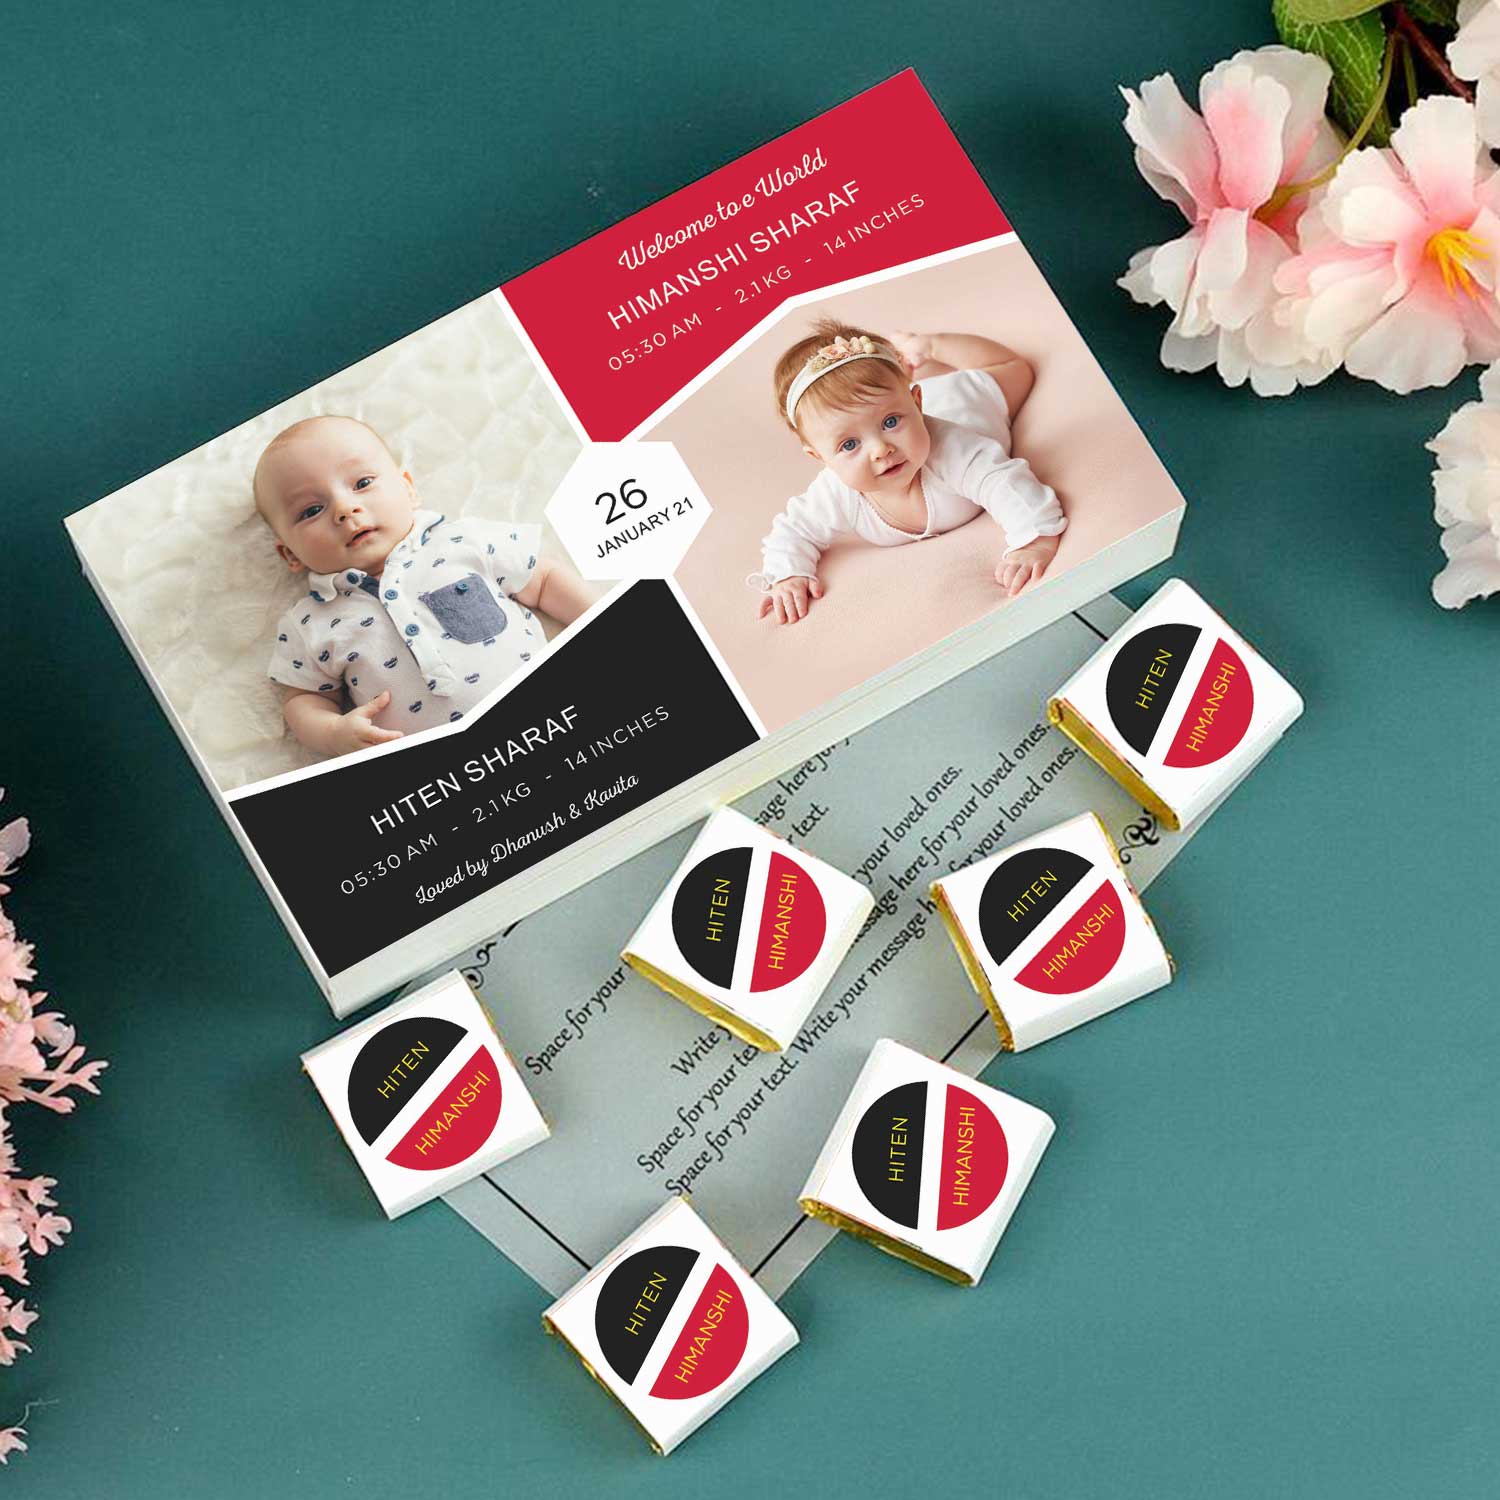 Personalised designed wrapped chocolates twins announcement.PRINTED WRAPPED CHOCOLATES WITH PERSONALIZED DESIGN TO ANNOUNCE THE TWIN'S BIRTH 